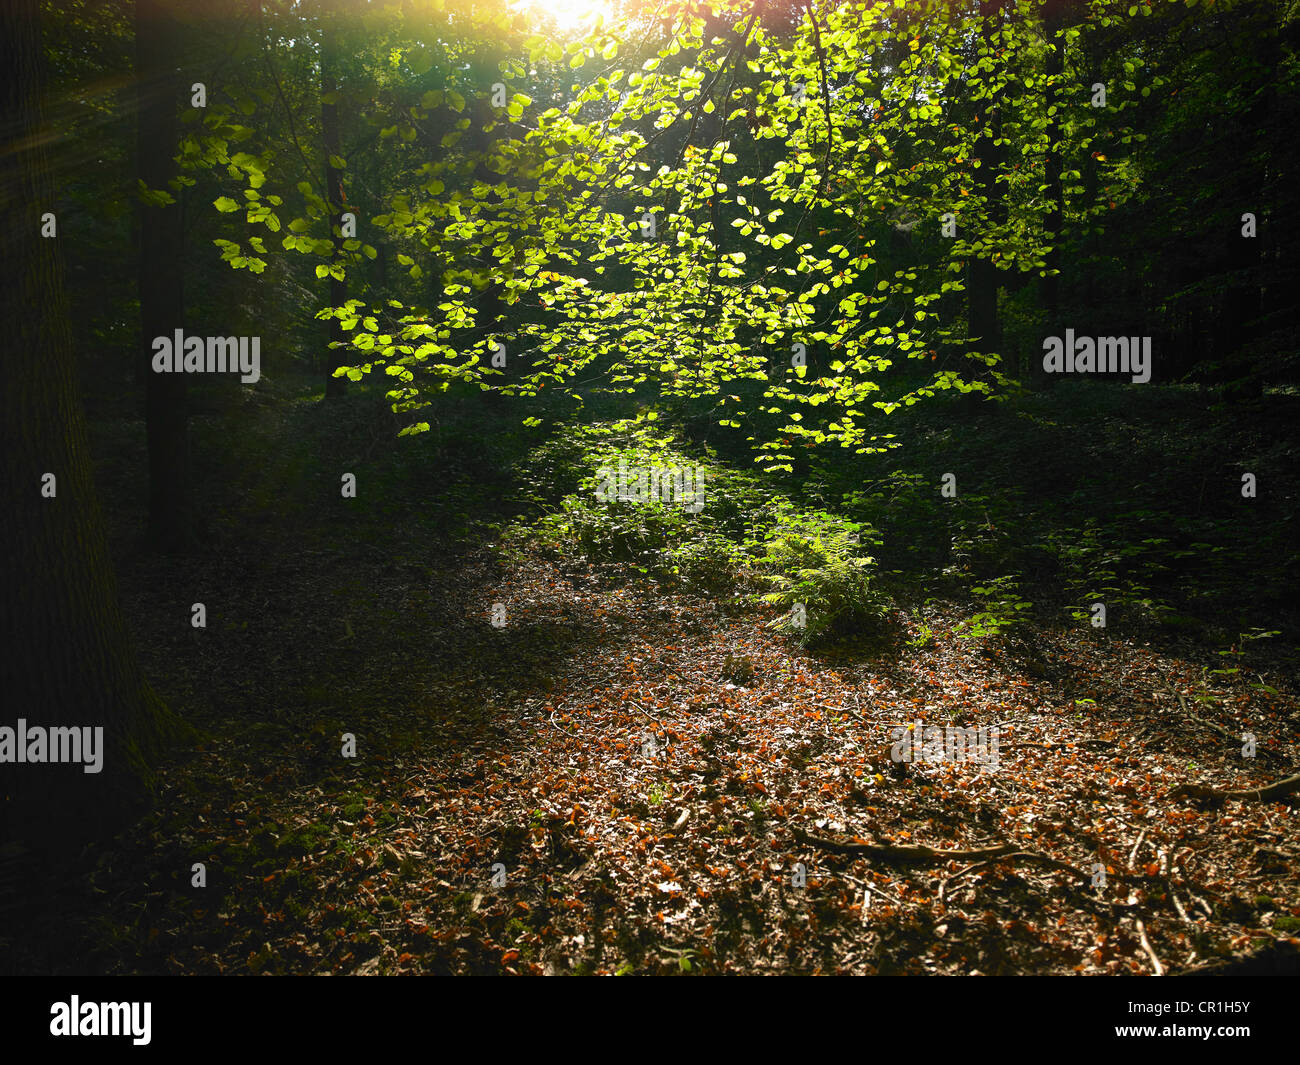 Sun shining through leaves in forest Stock Photo